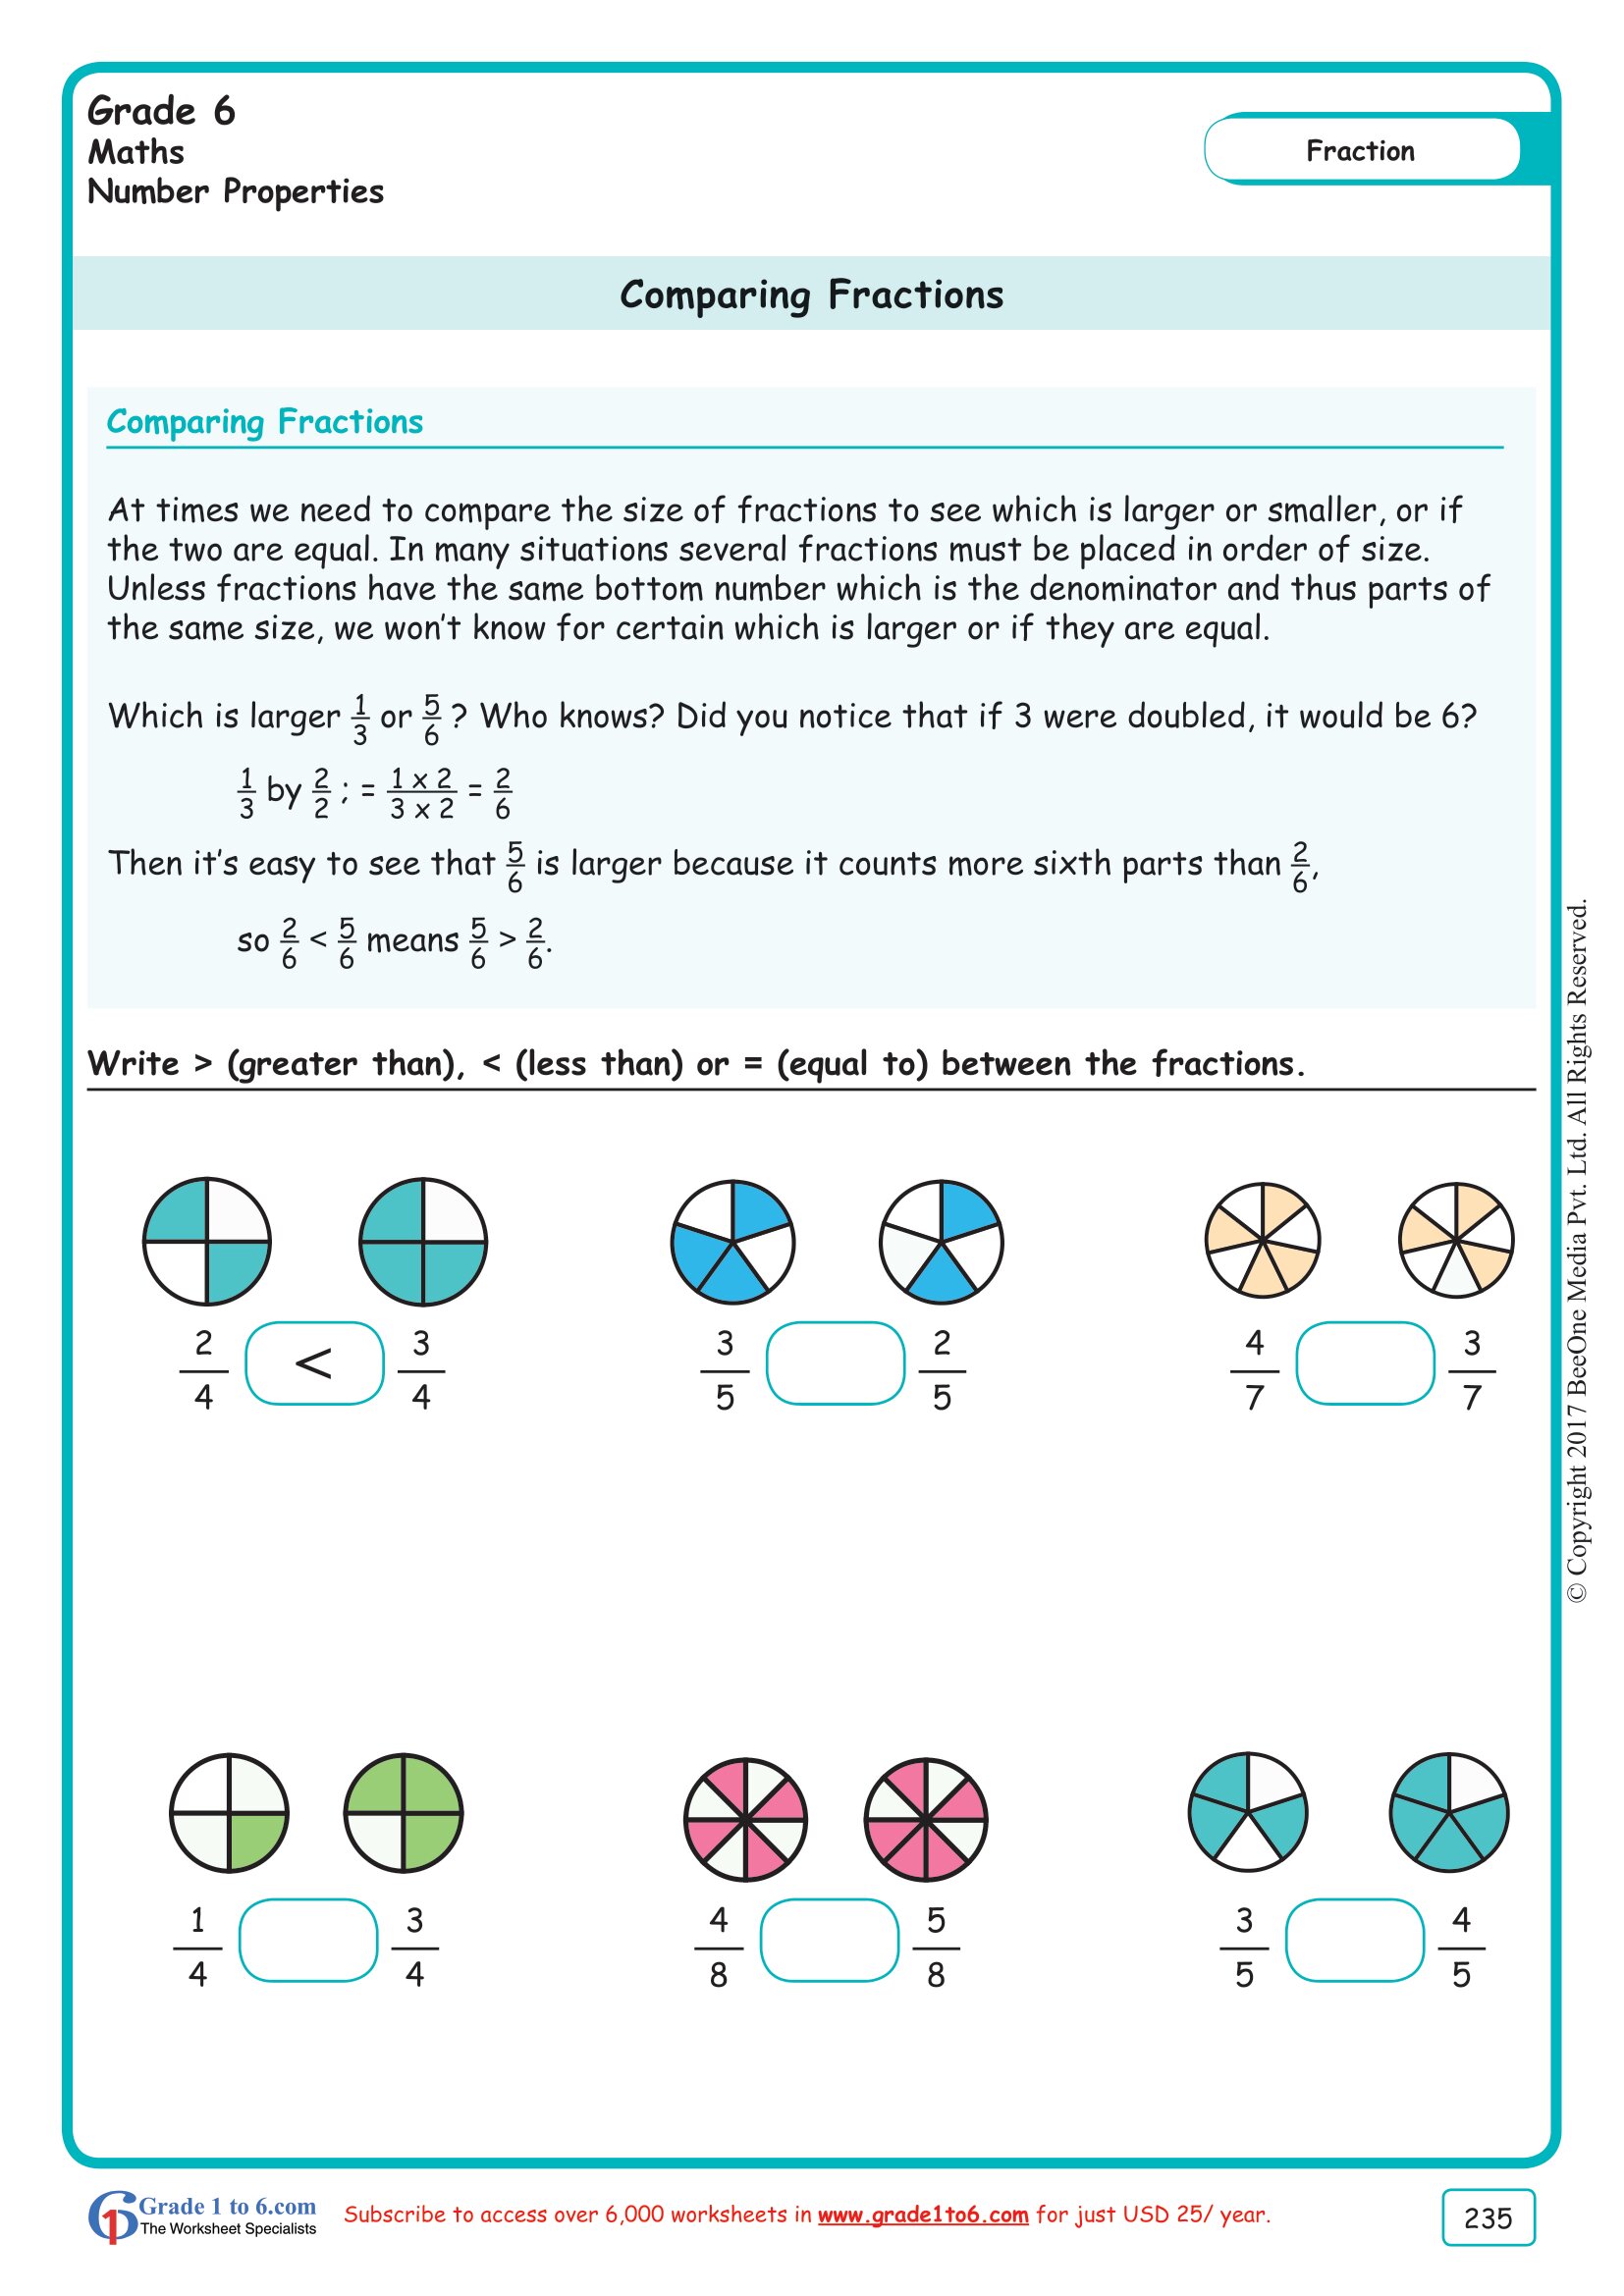 grade-6-fractions-worksheets-adding-mixed-numbers-k5-learning-grade-6